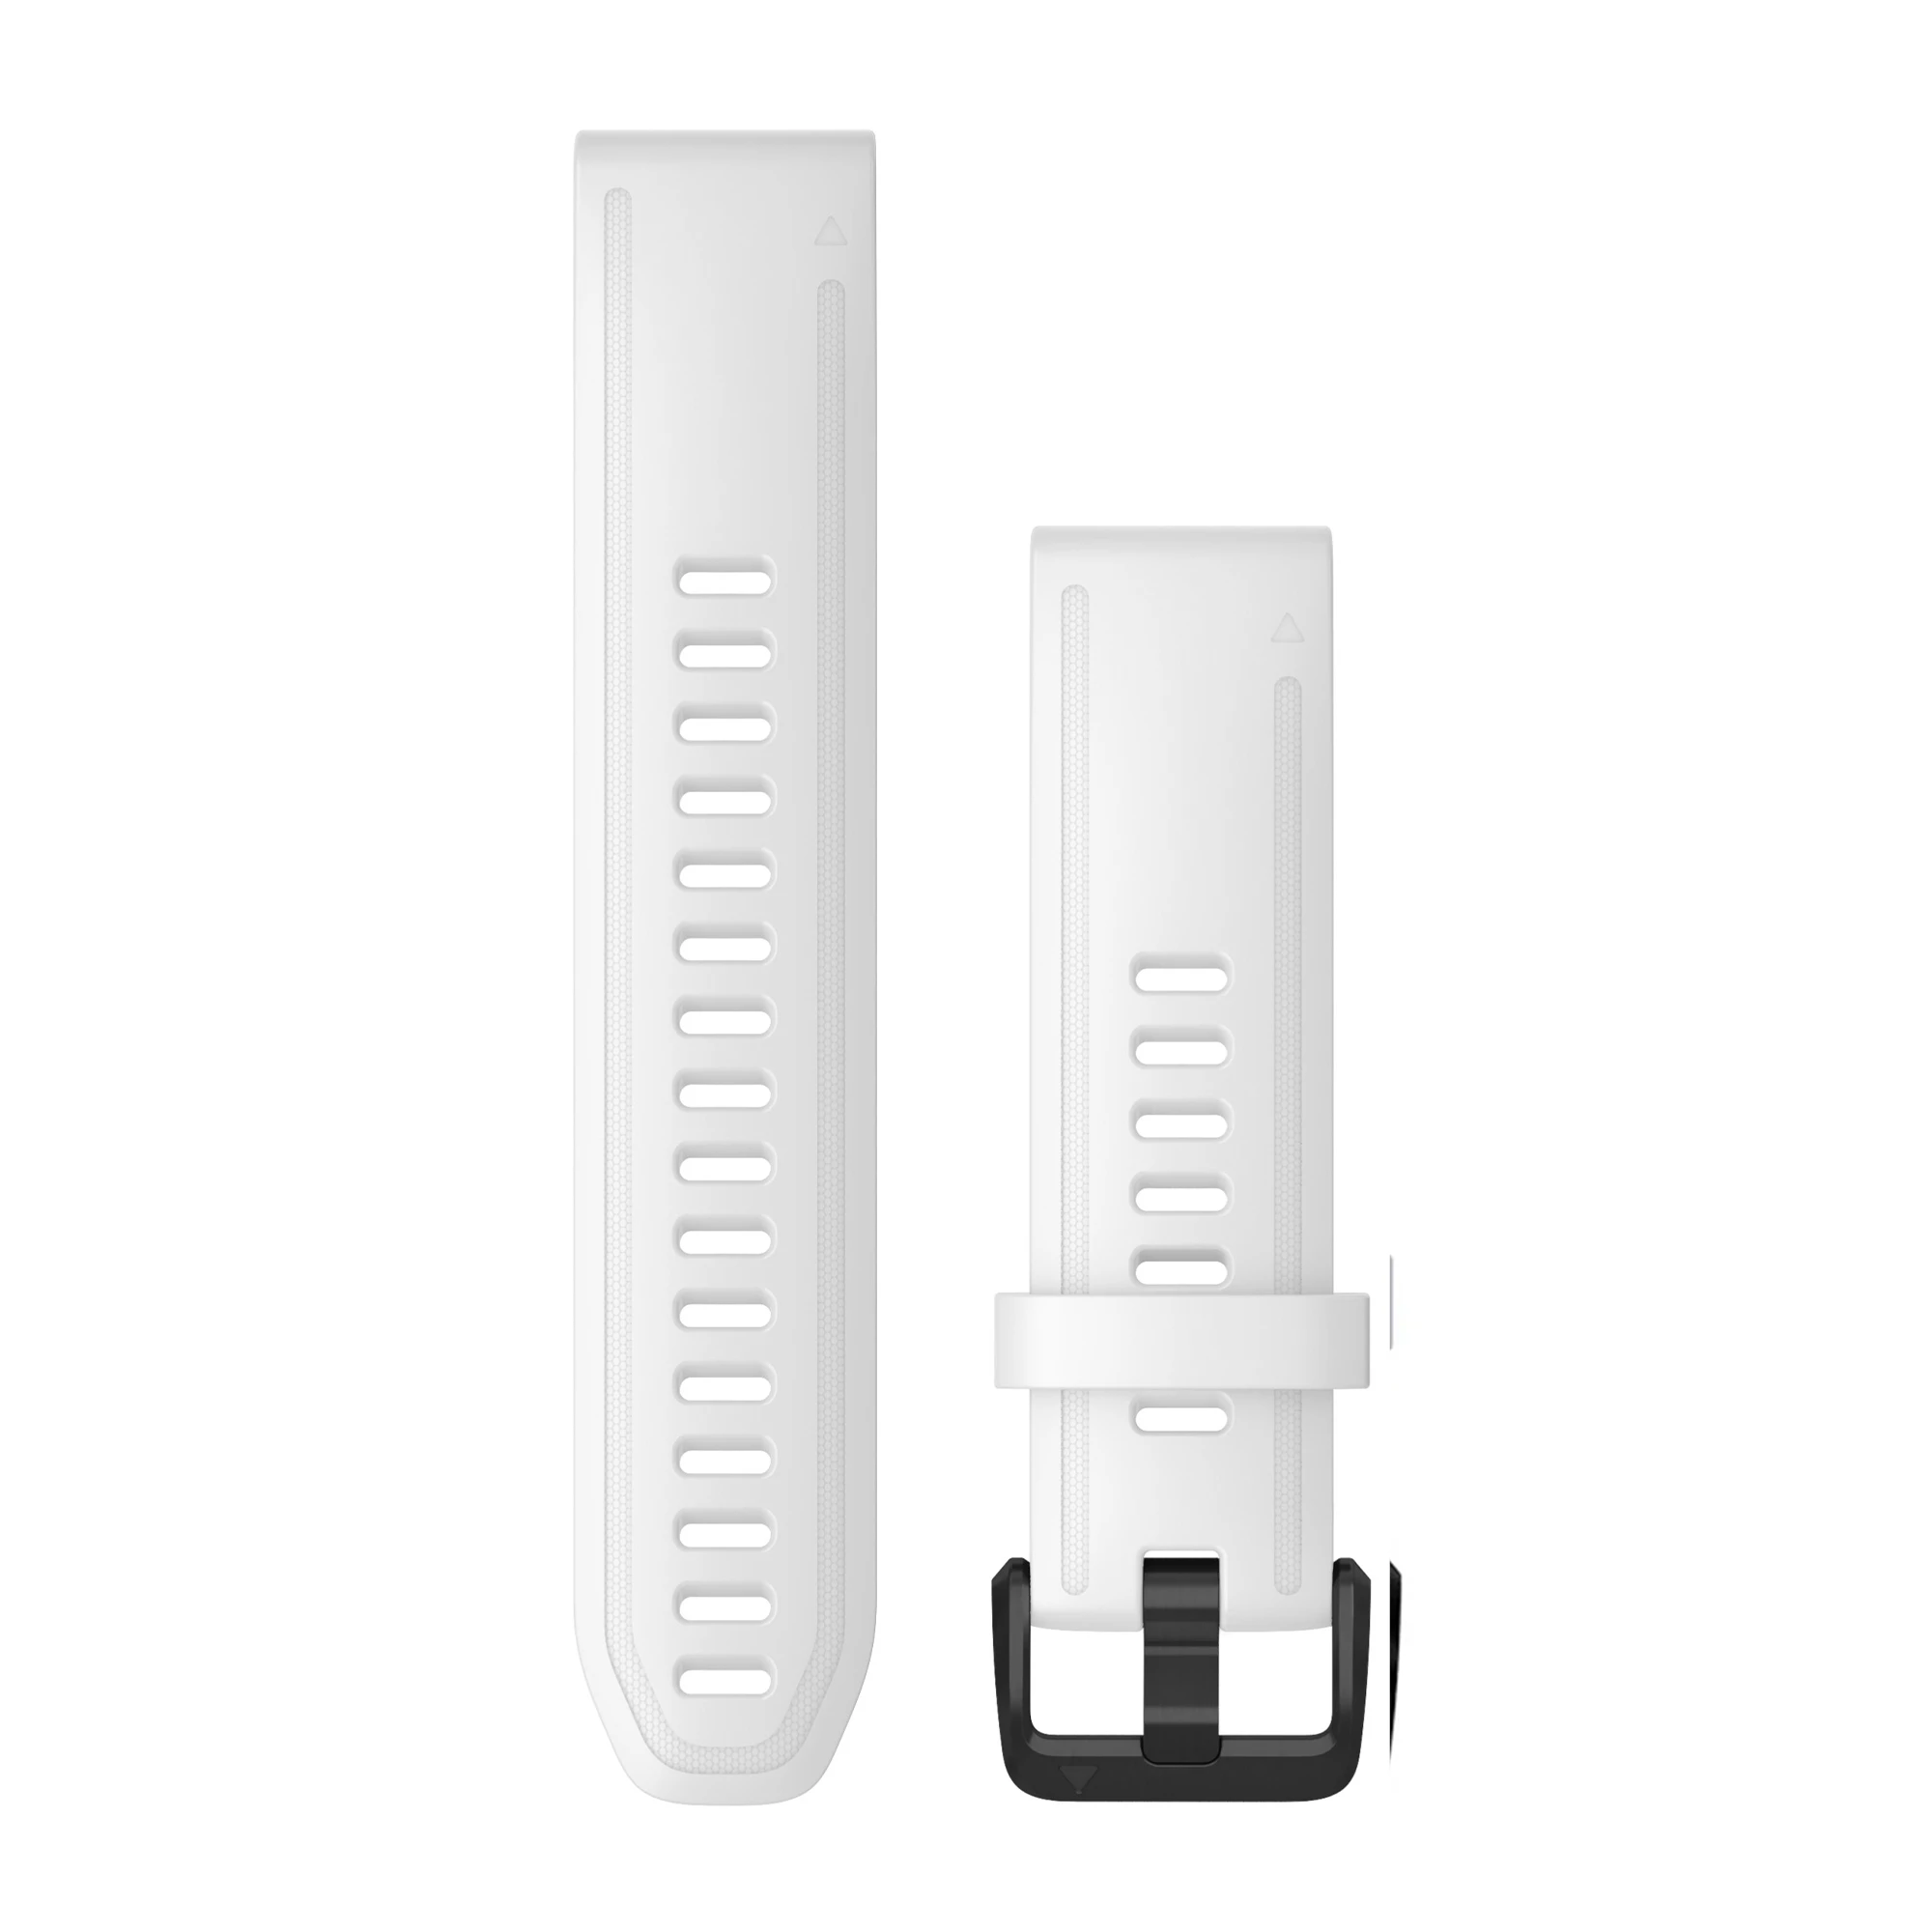 Ремінець Garmin QuickFit 20 Watch Bands Silicone - White with Black Hardware (010-12865-00)